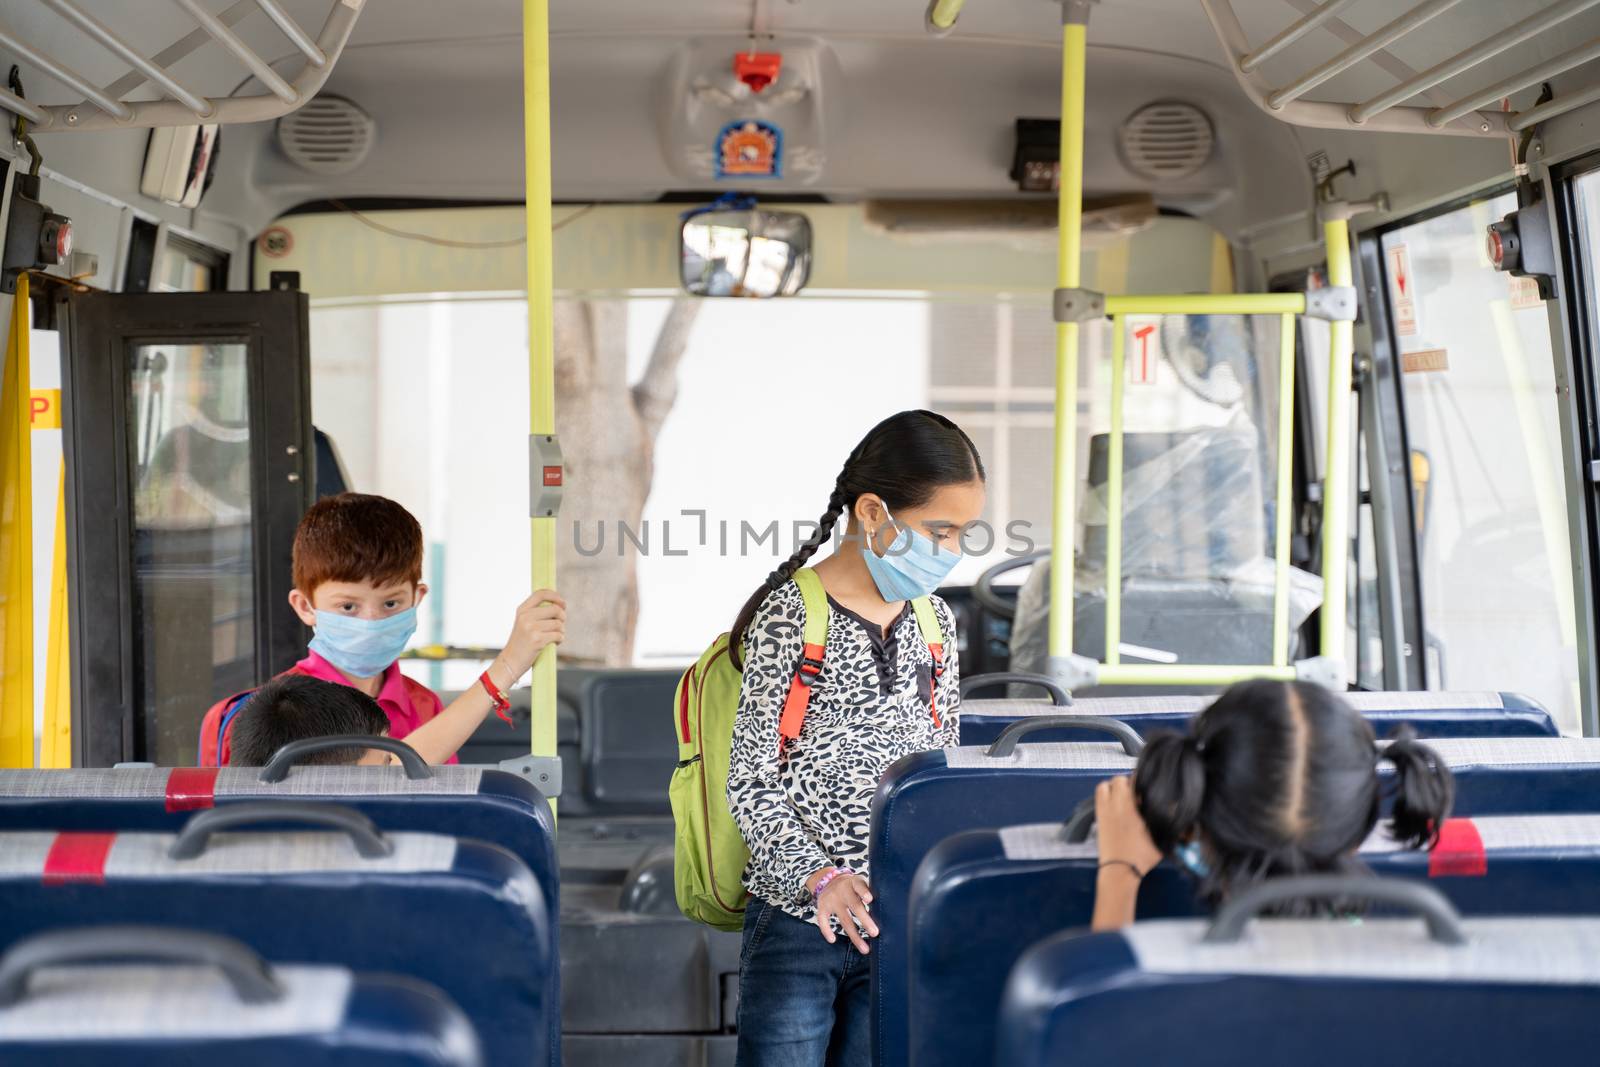 Kids with medical mask coming inside school bus and sitting on seats while maintaining social distance due to coronavirus or covid-19 pandemic - Concept of school reopen or back to school by lakshmiprasad.maski@gmai.com